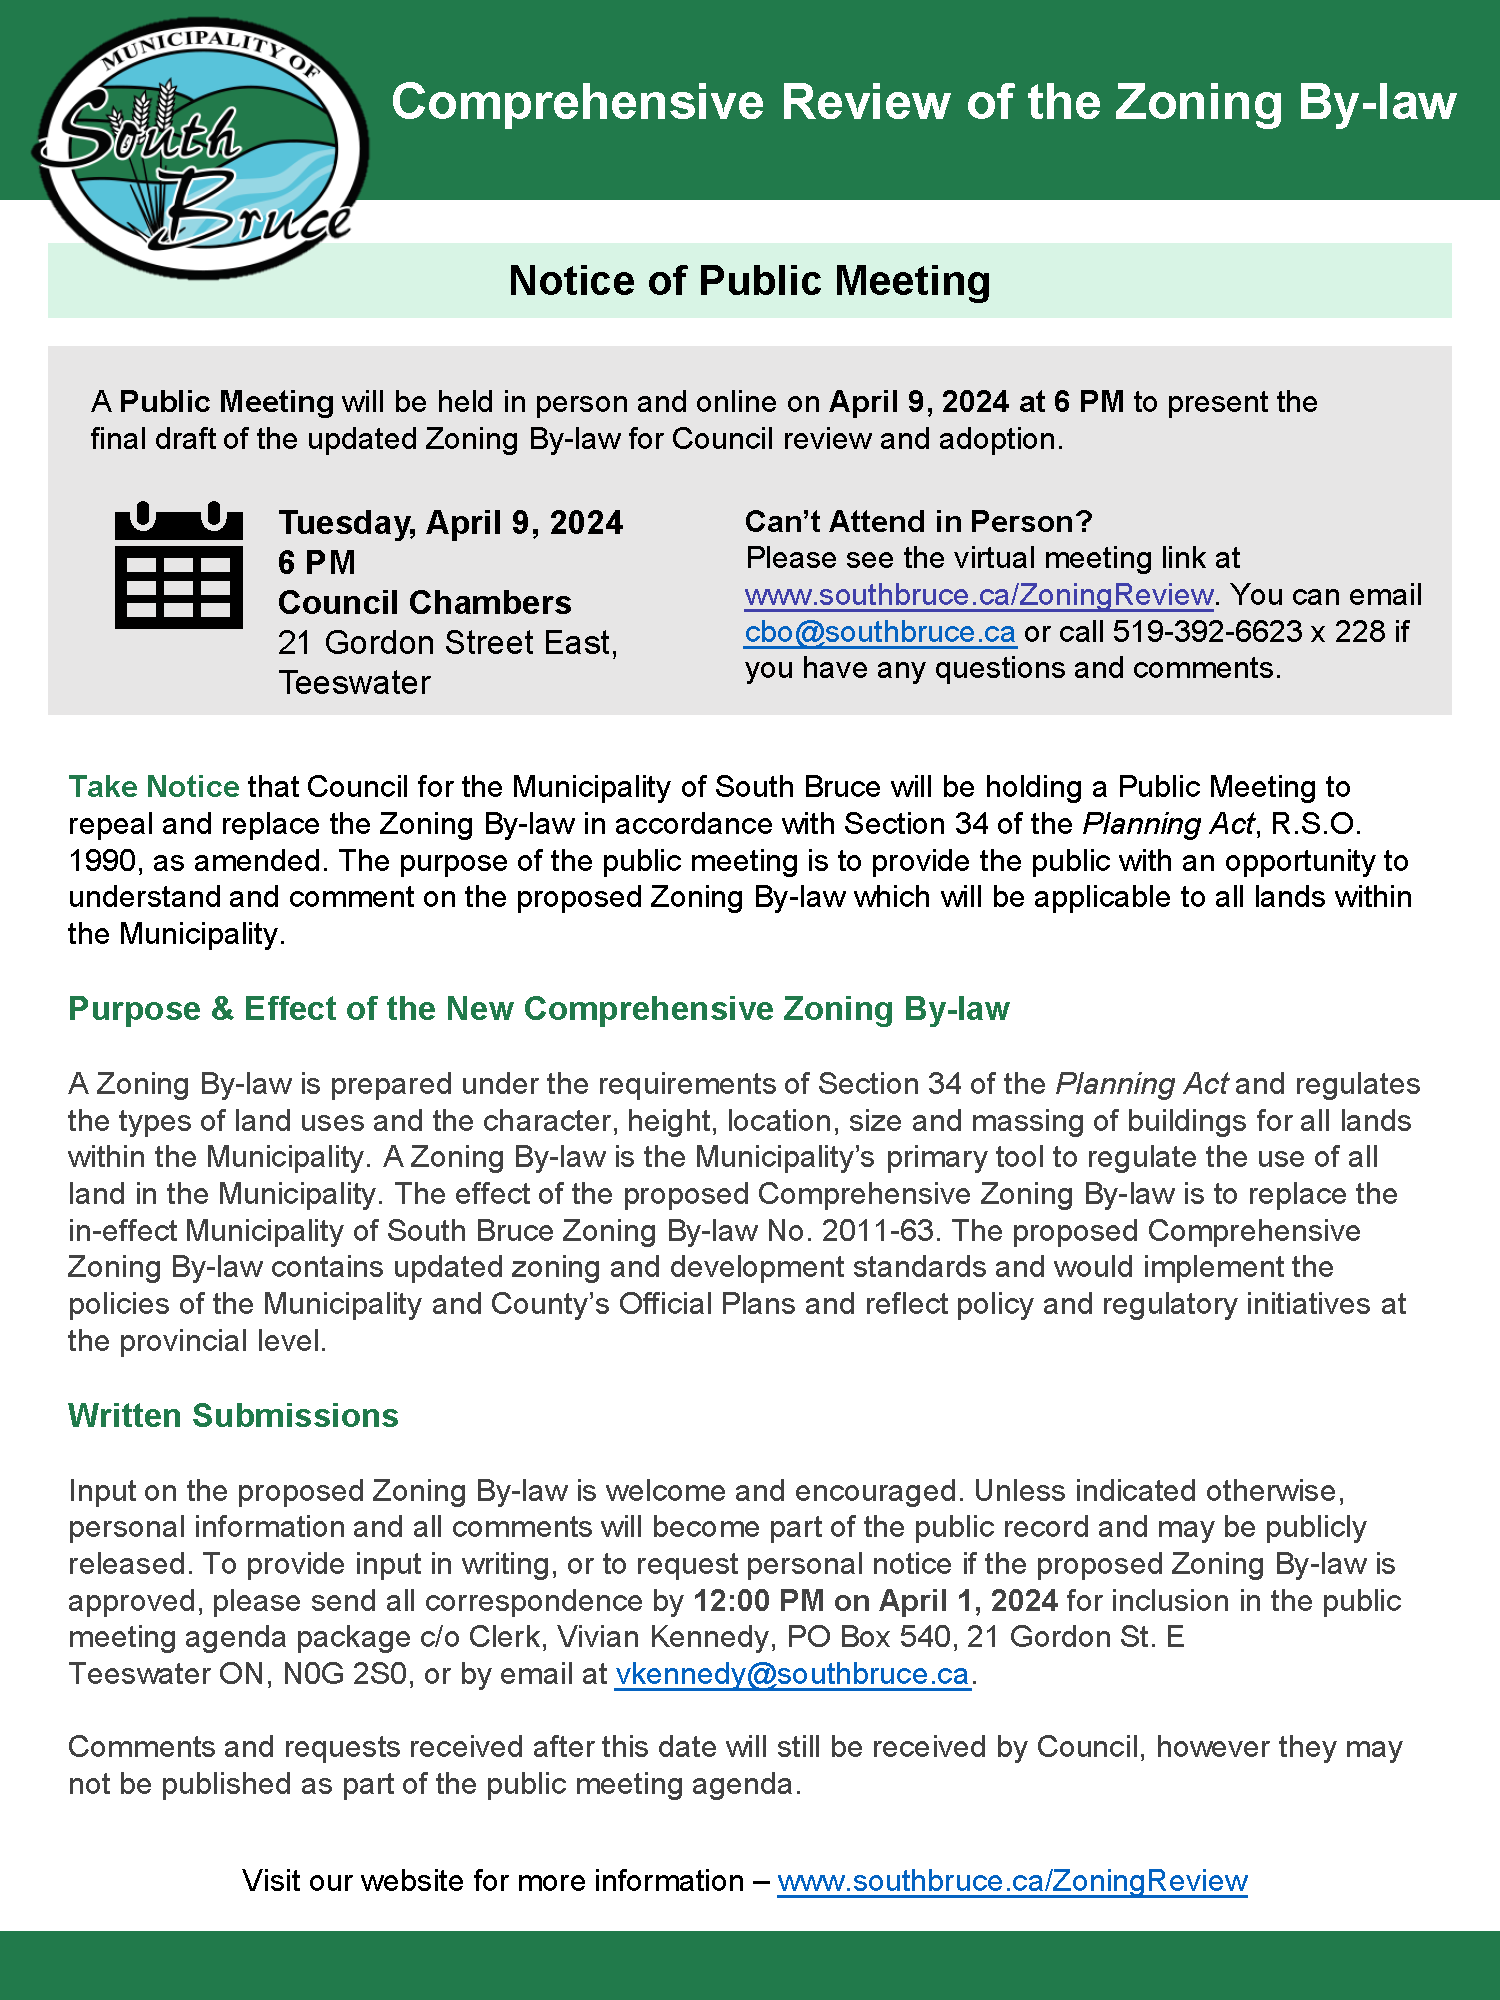 Zoning By-Law Review Flyer